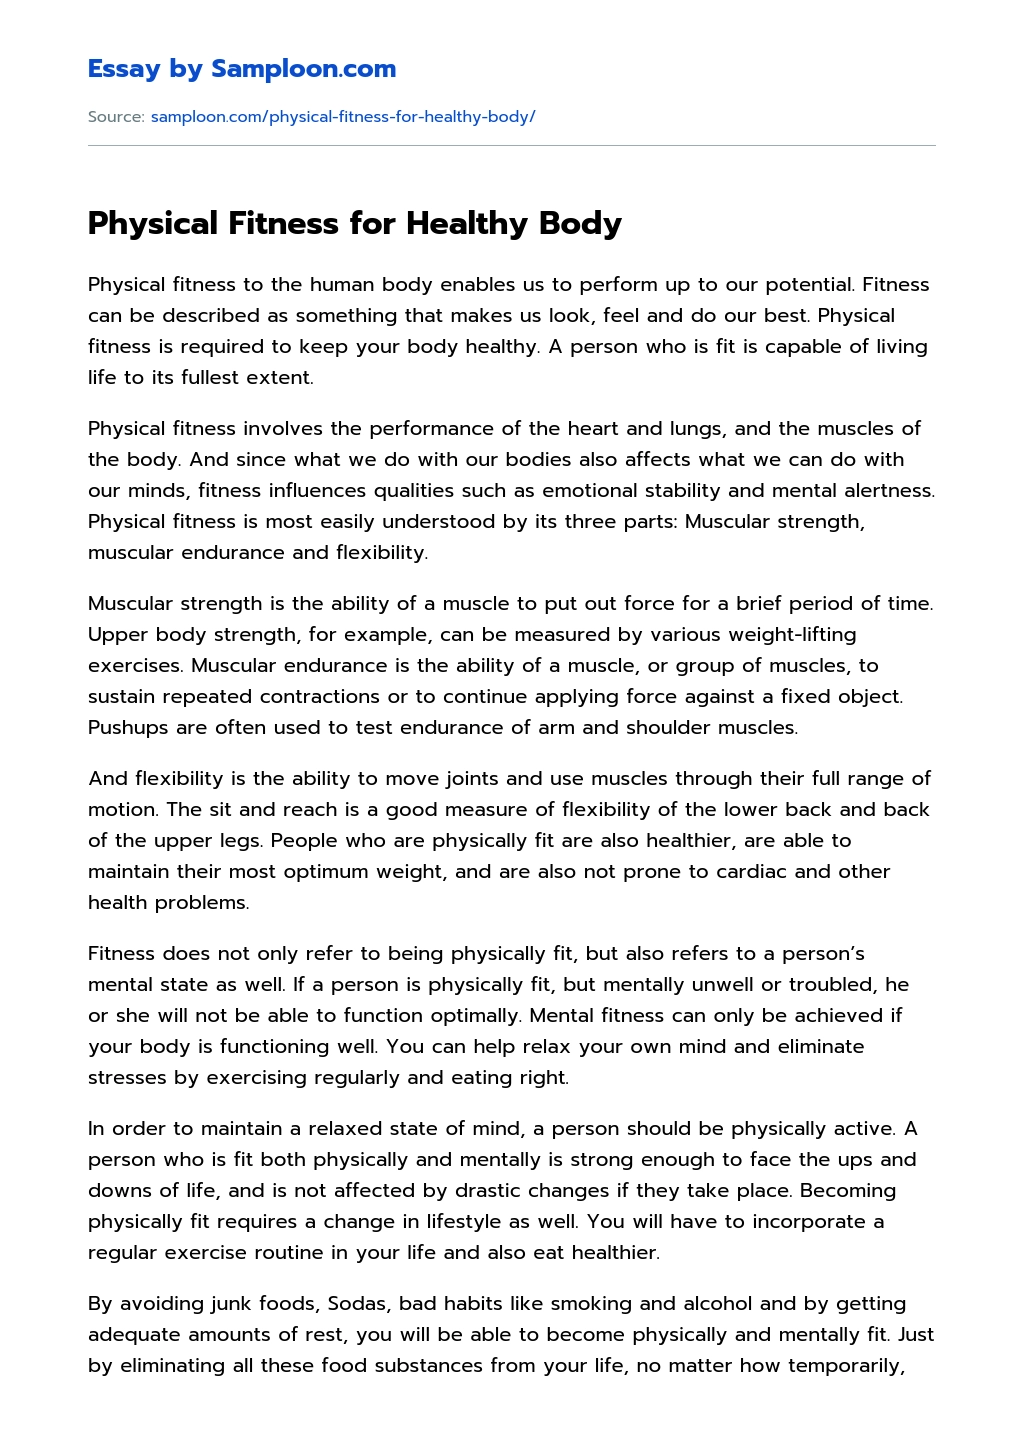 Physical Fitness for Healthy Body essay